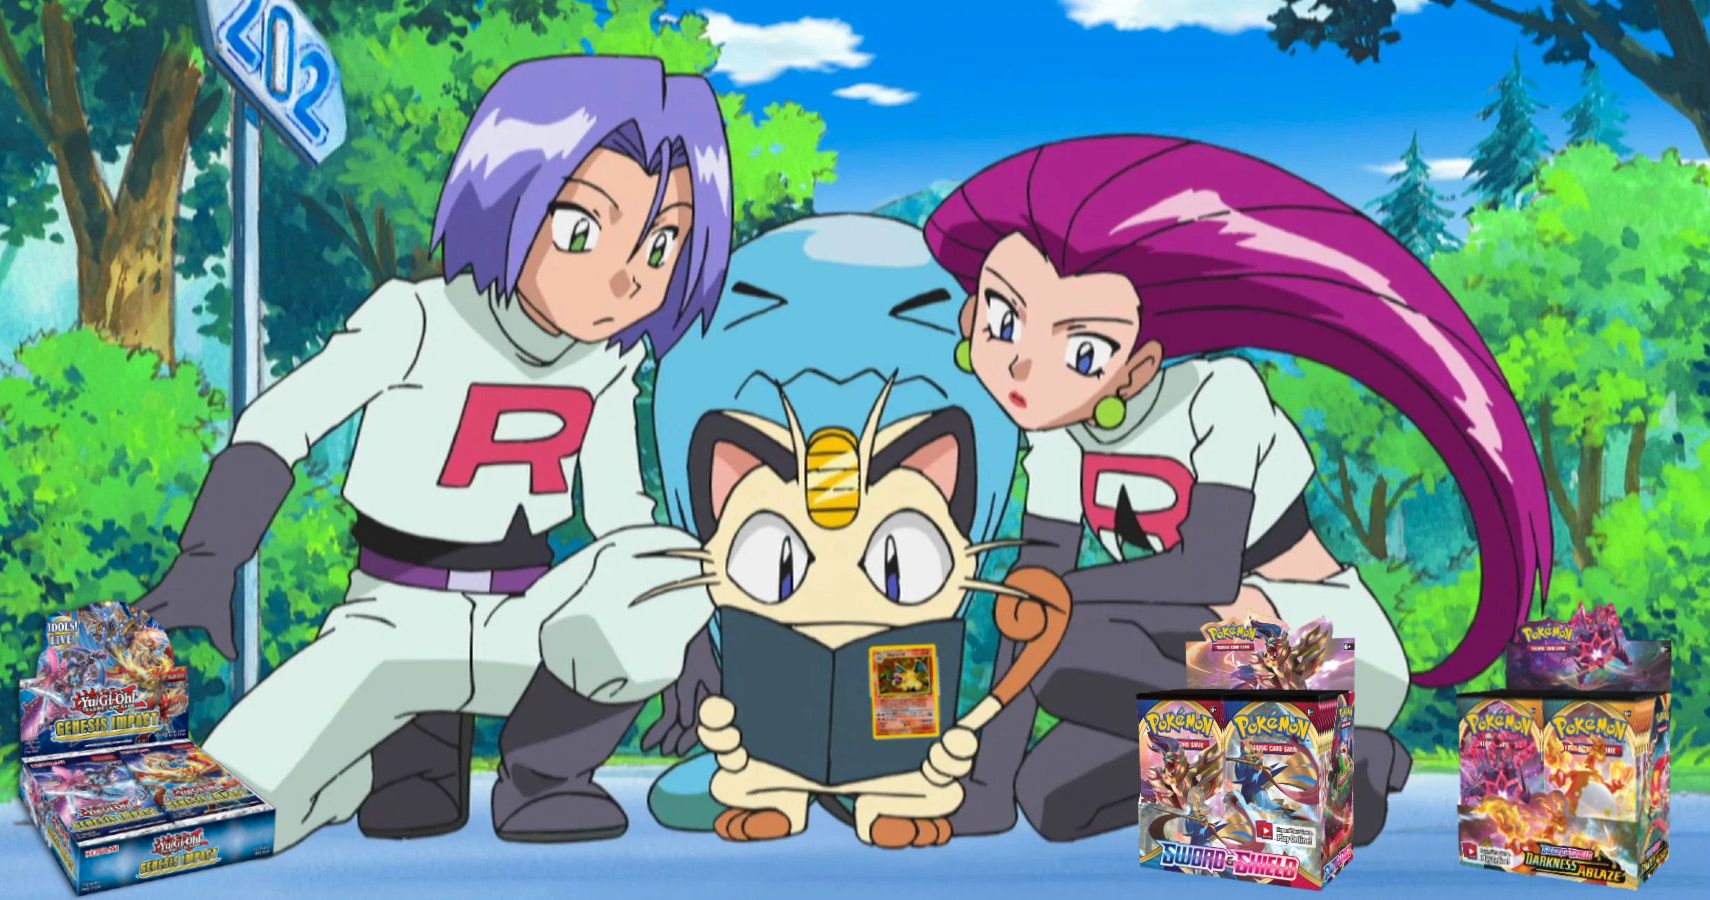 Man Arrested After Failed Pokemon Card Heist no Team Rocket members involved